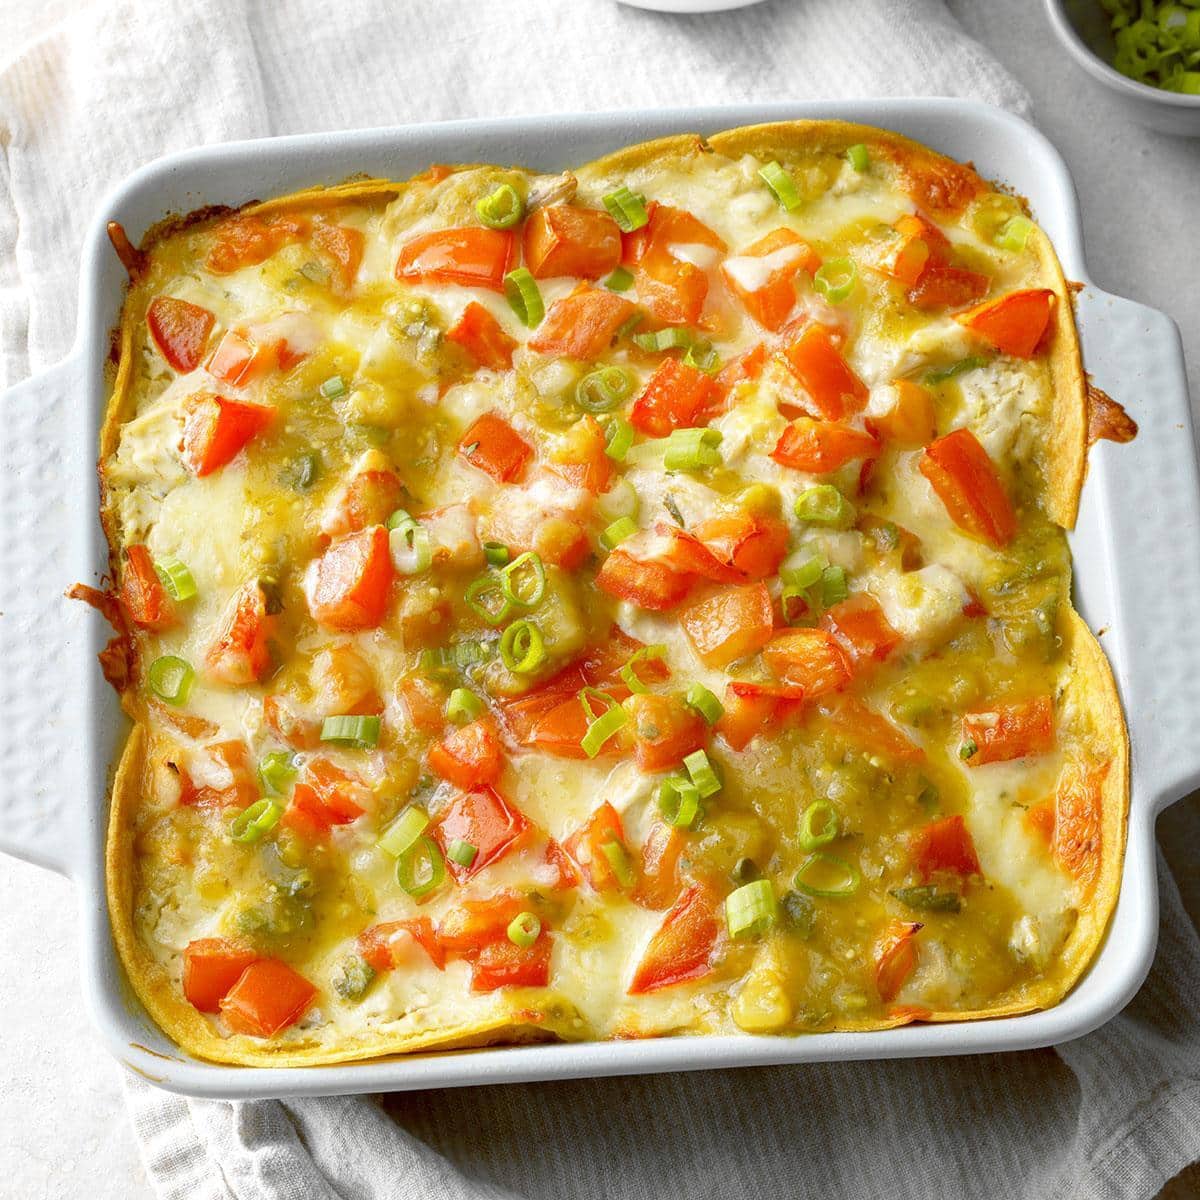 Vegetable and cheese casserole with carrots and scallions